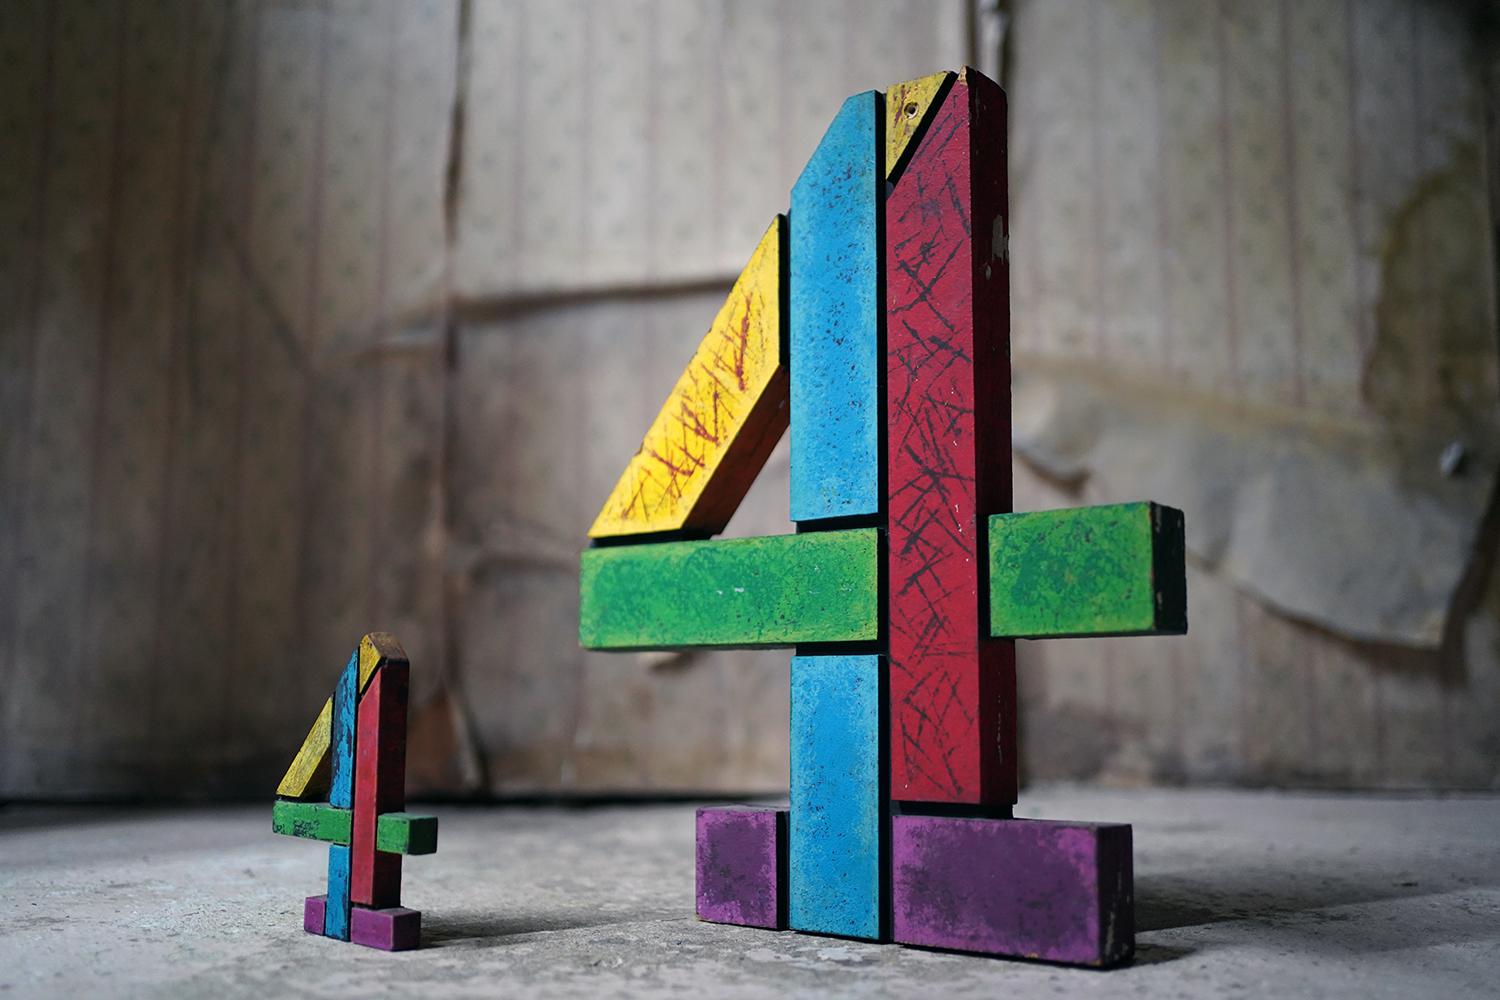 Late 20th Century Two 20thC Channel 4 Production Painted Wooden Block Logo Idents, c.1990-95